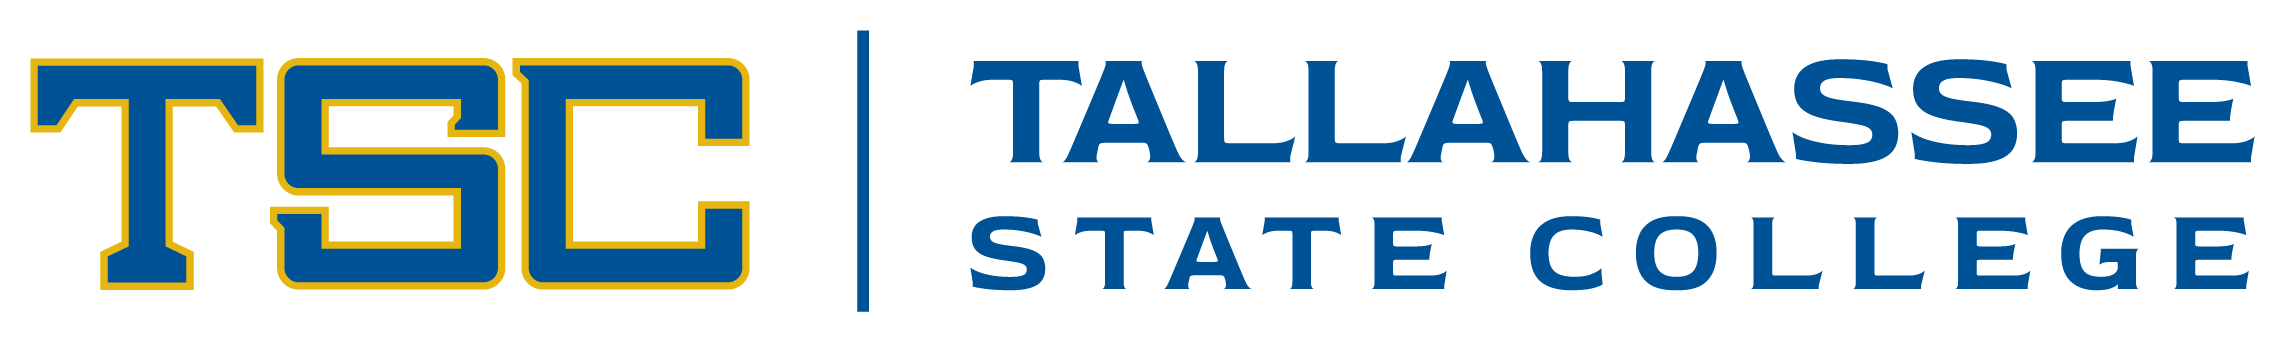 Tallahassee State College